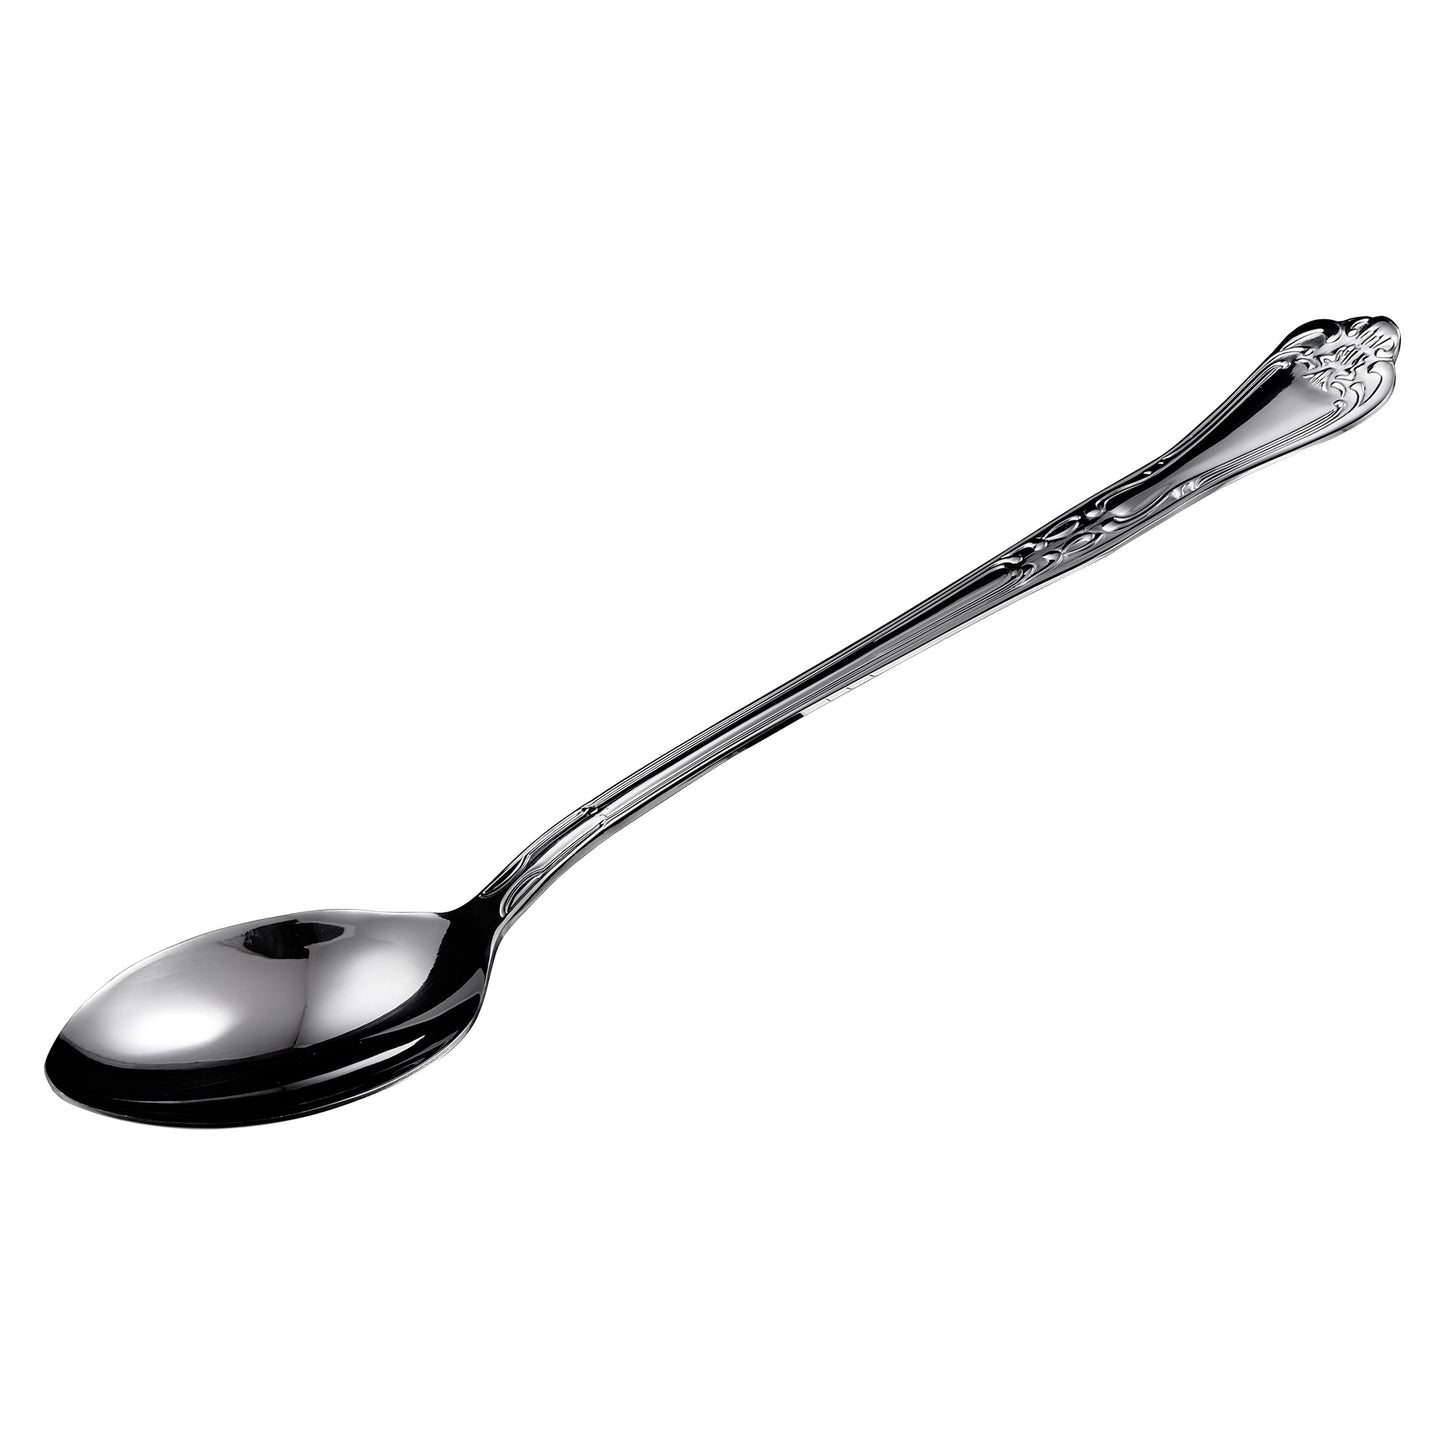 LE-13 - 13" Solid Spoon, Stainless Steel